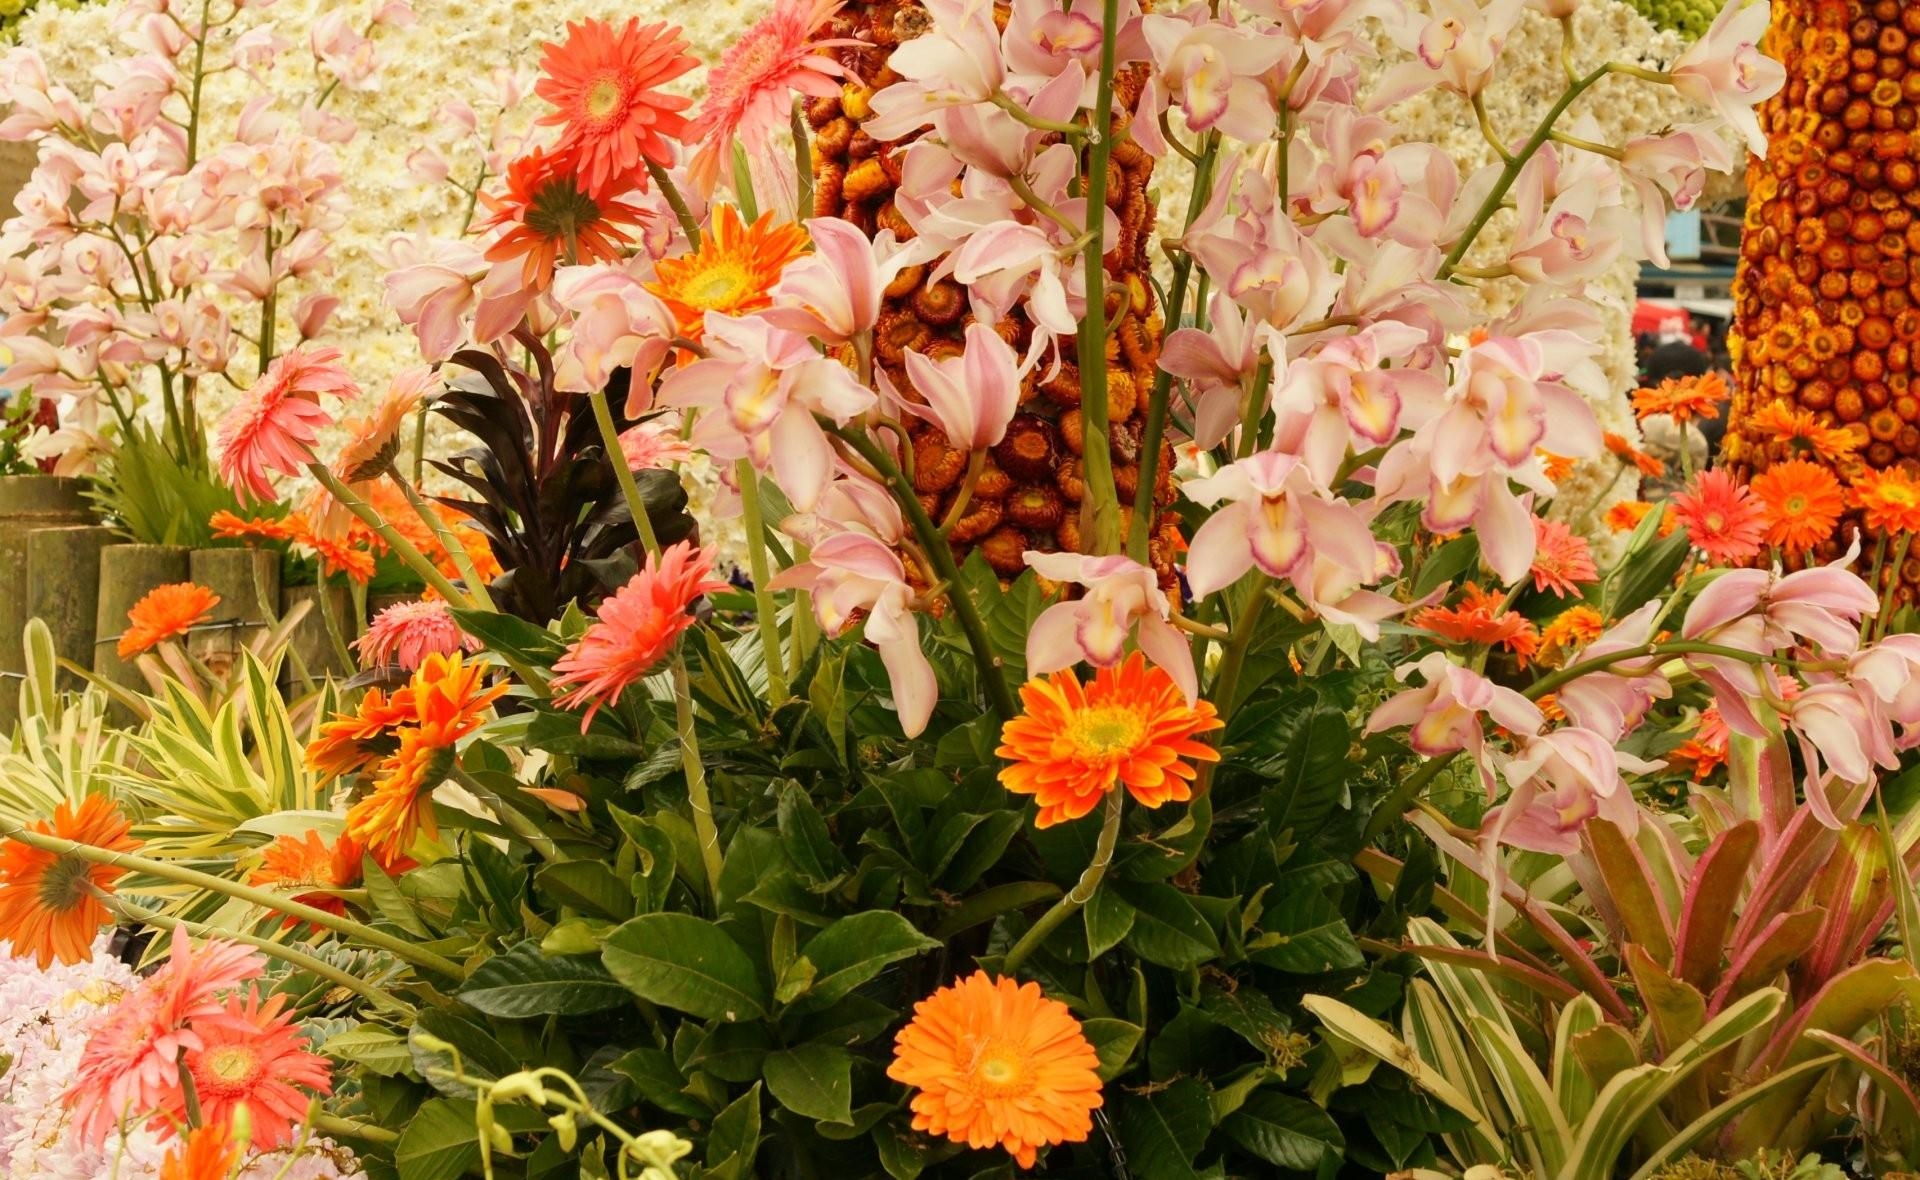 flowers, gerberas, flower bed, flowerbed, composition, handsomely, it's beautiful, orchid